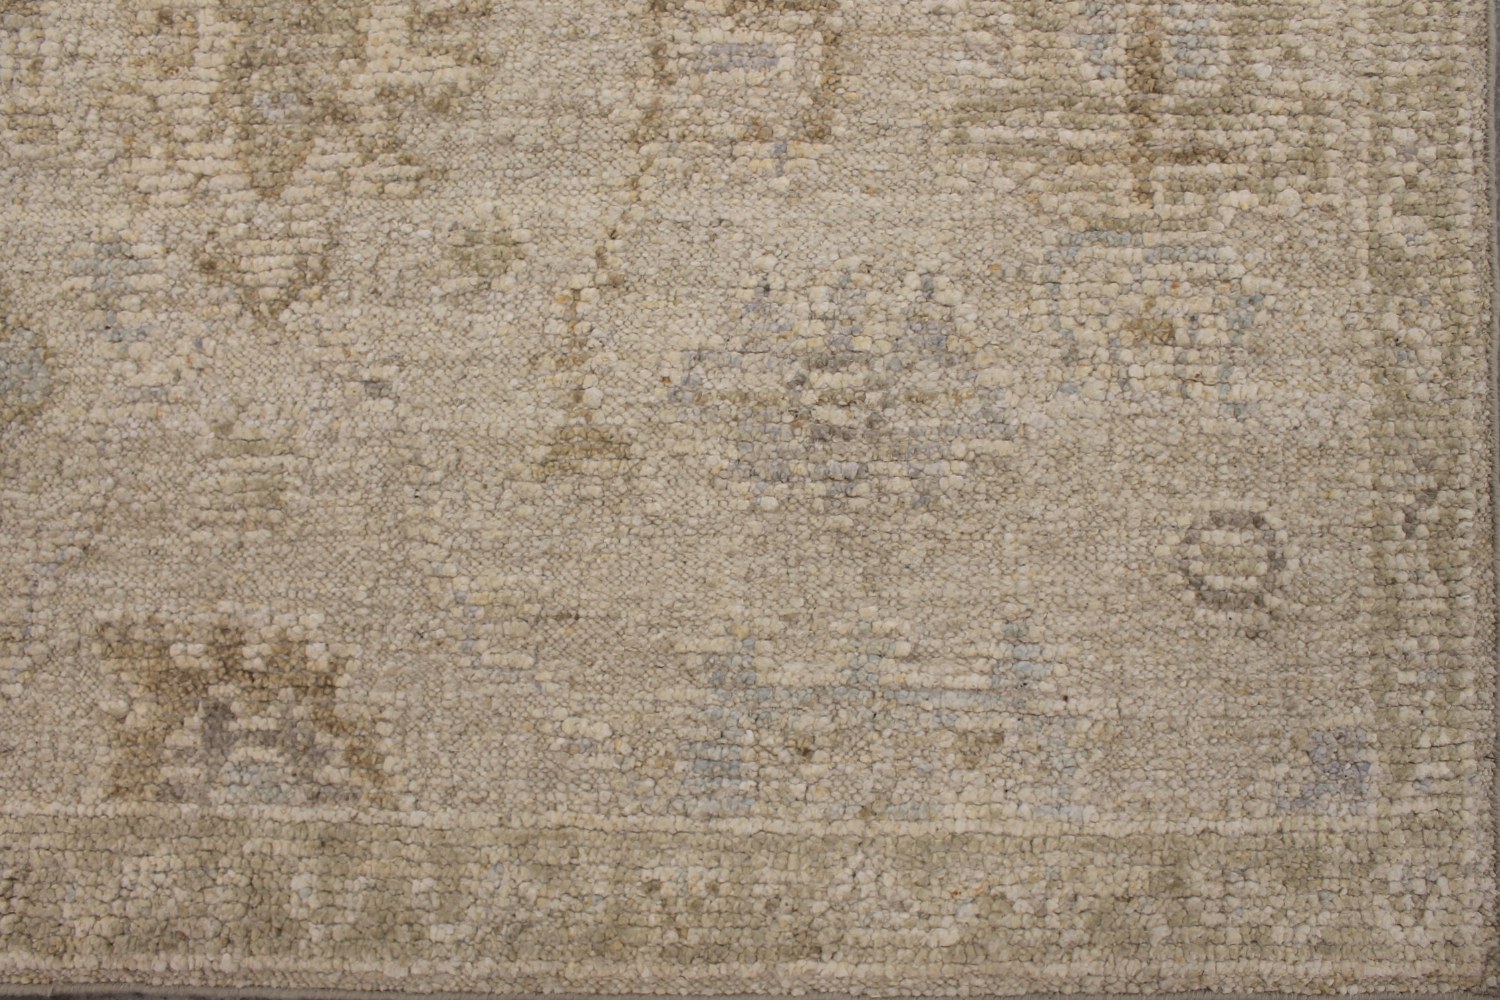 6x9 Oushak Hand Knotted Wool Area Rug - MR028051